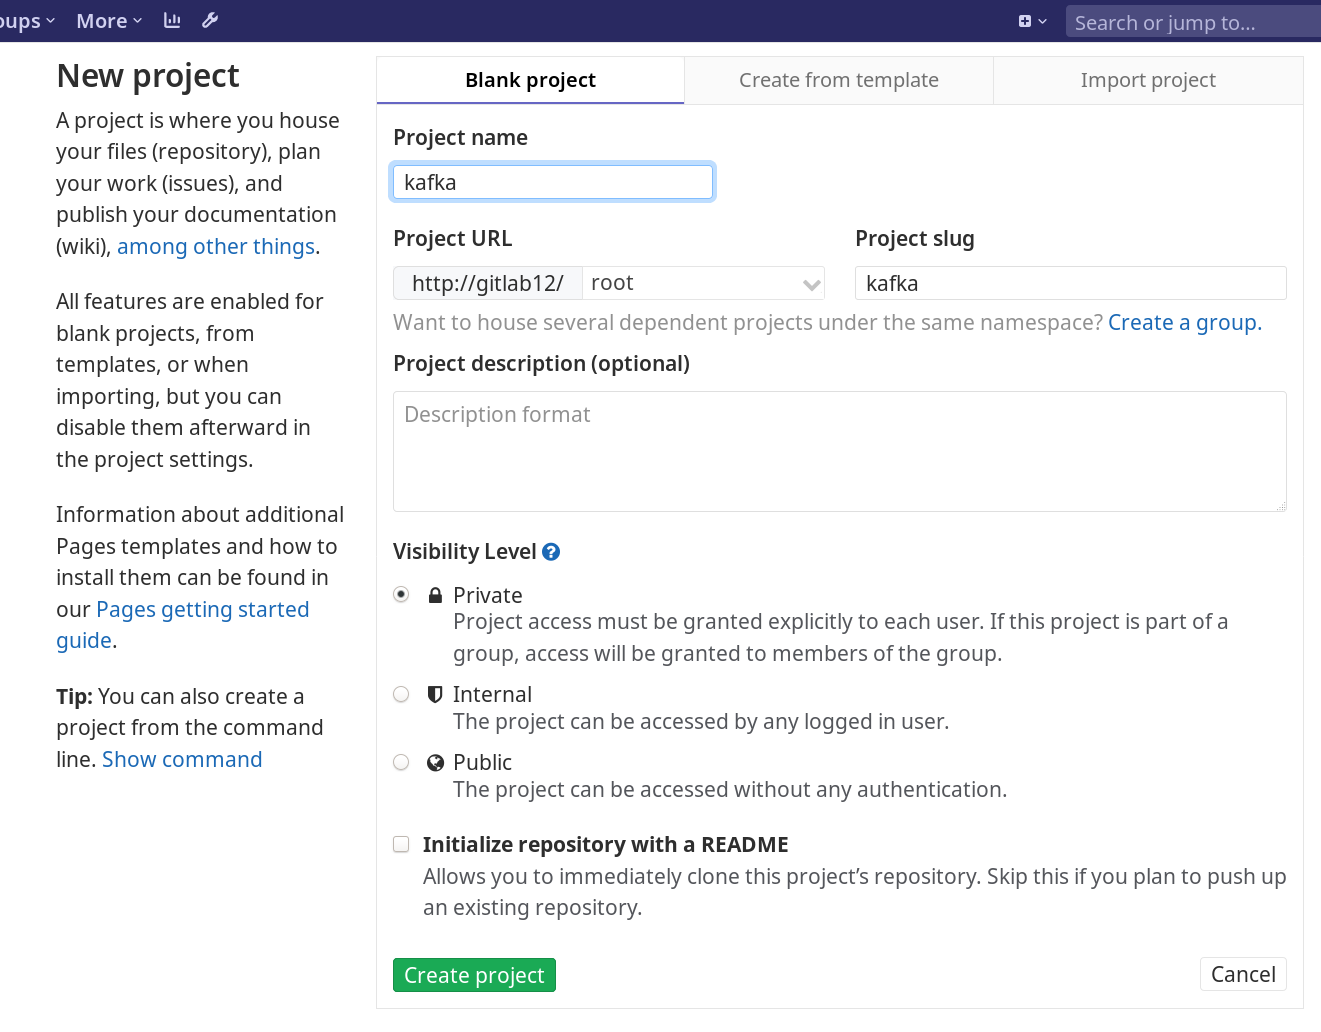 Create new project from GitLab